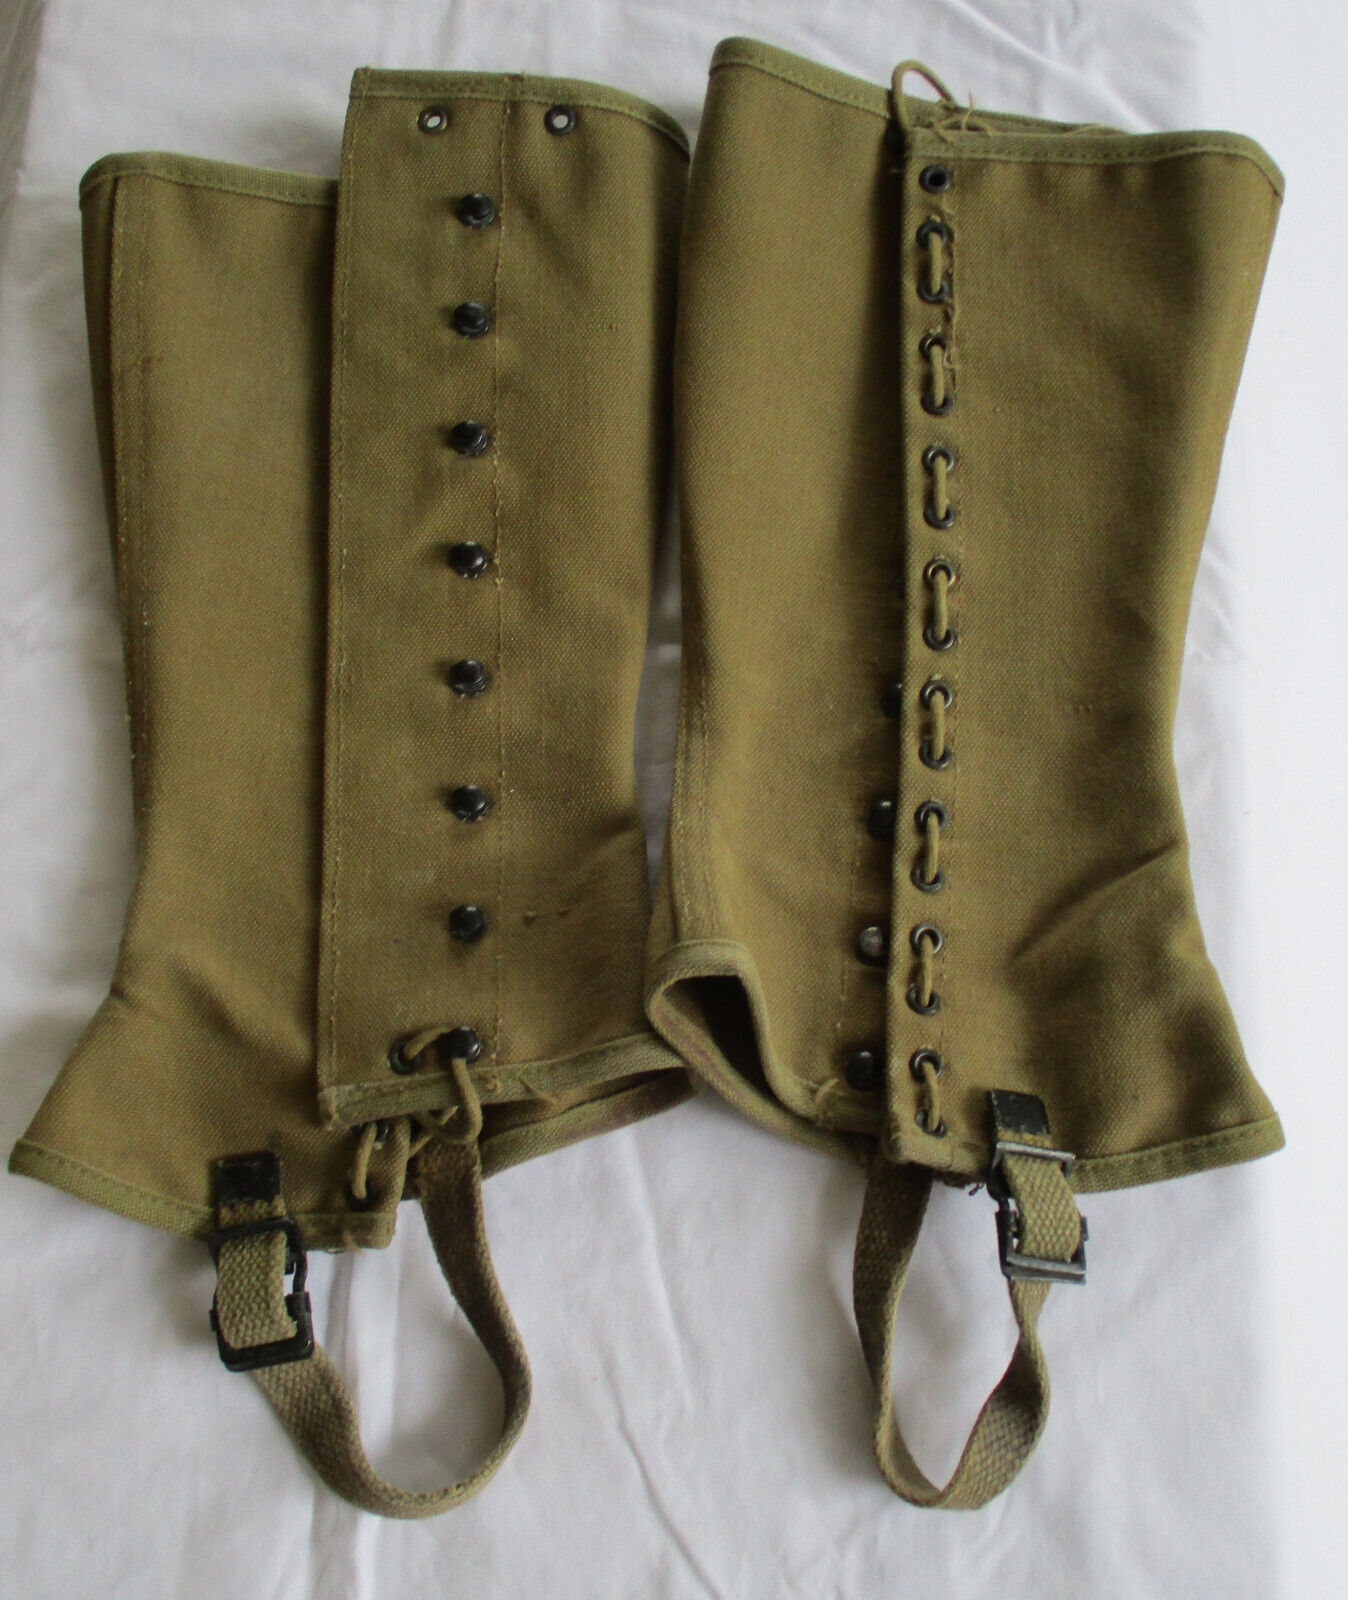 WWII US Army men's leggings / spats / gaiters 3R 1942